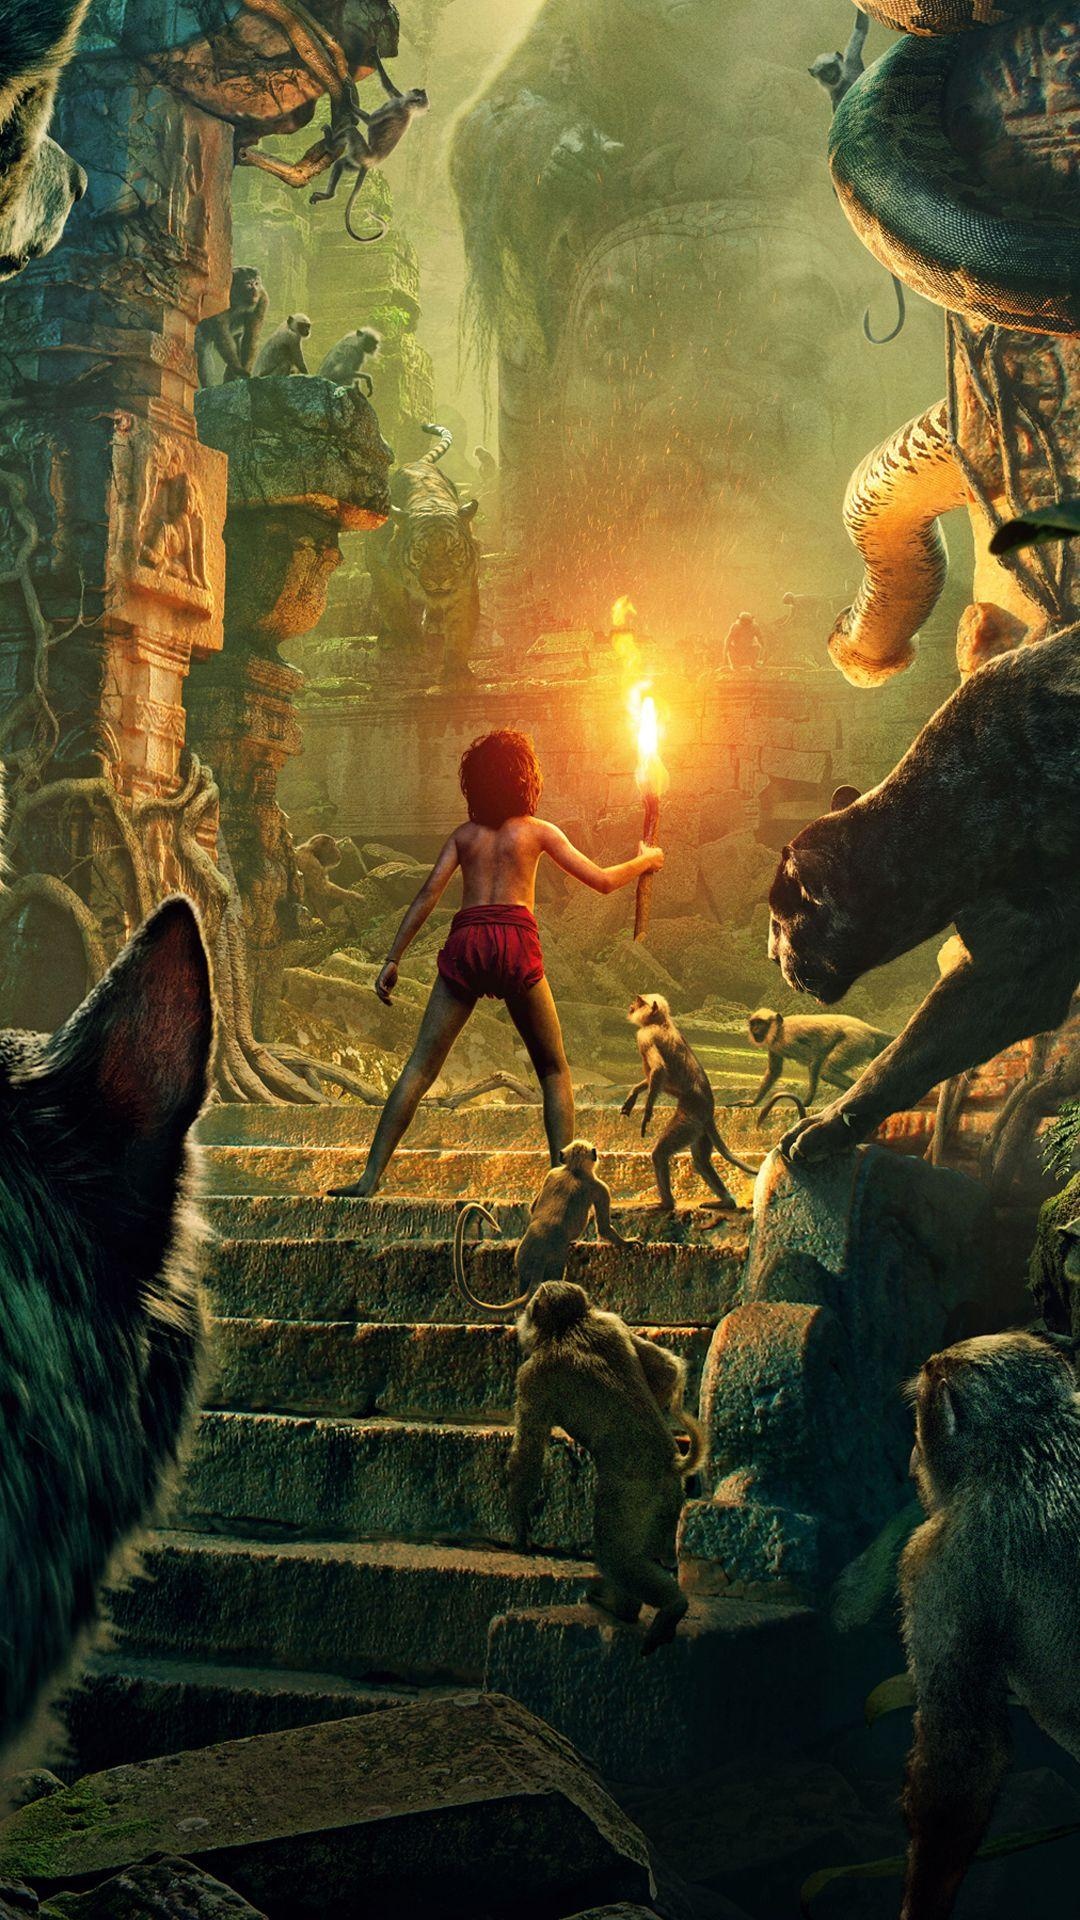 The Jungle Book movie, Jungle-inspired wallpapers, Nature's wonders, Captivating visuals, 1080x1920 Full HD Phone